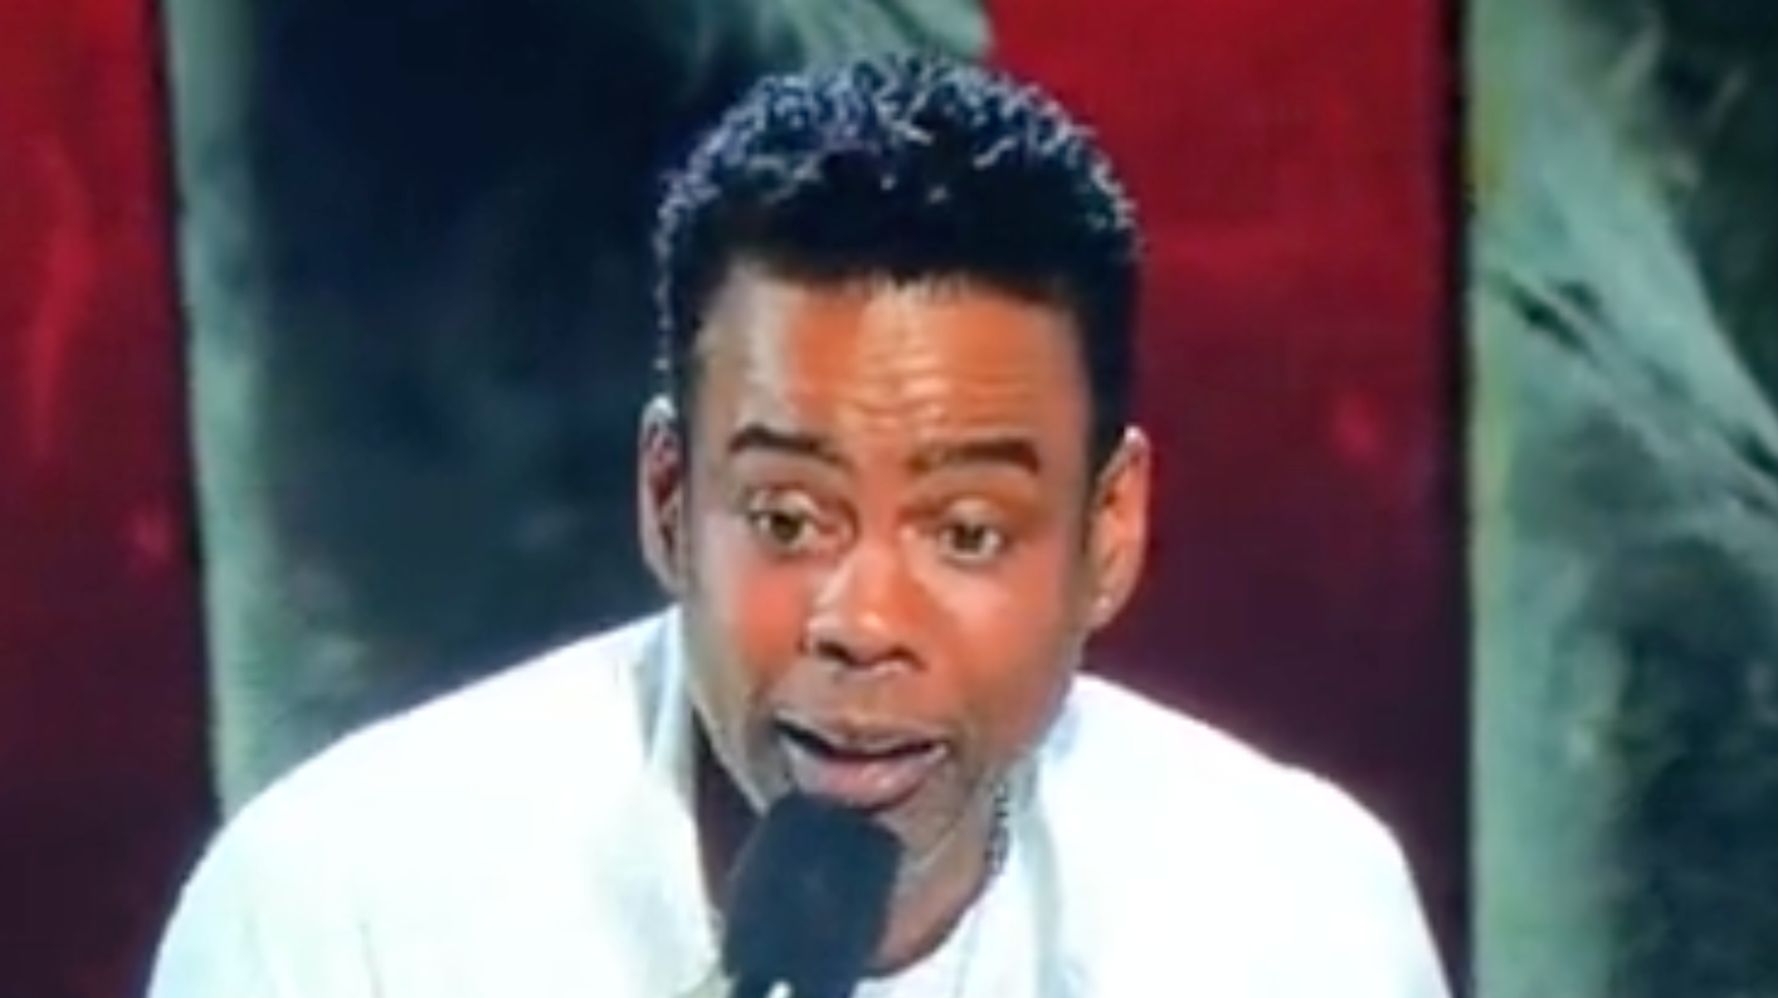 Chris Rock Finally Opens Up About Will Smith’s Infamous Slap In Netflix Special (huffpost.com)